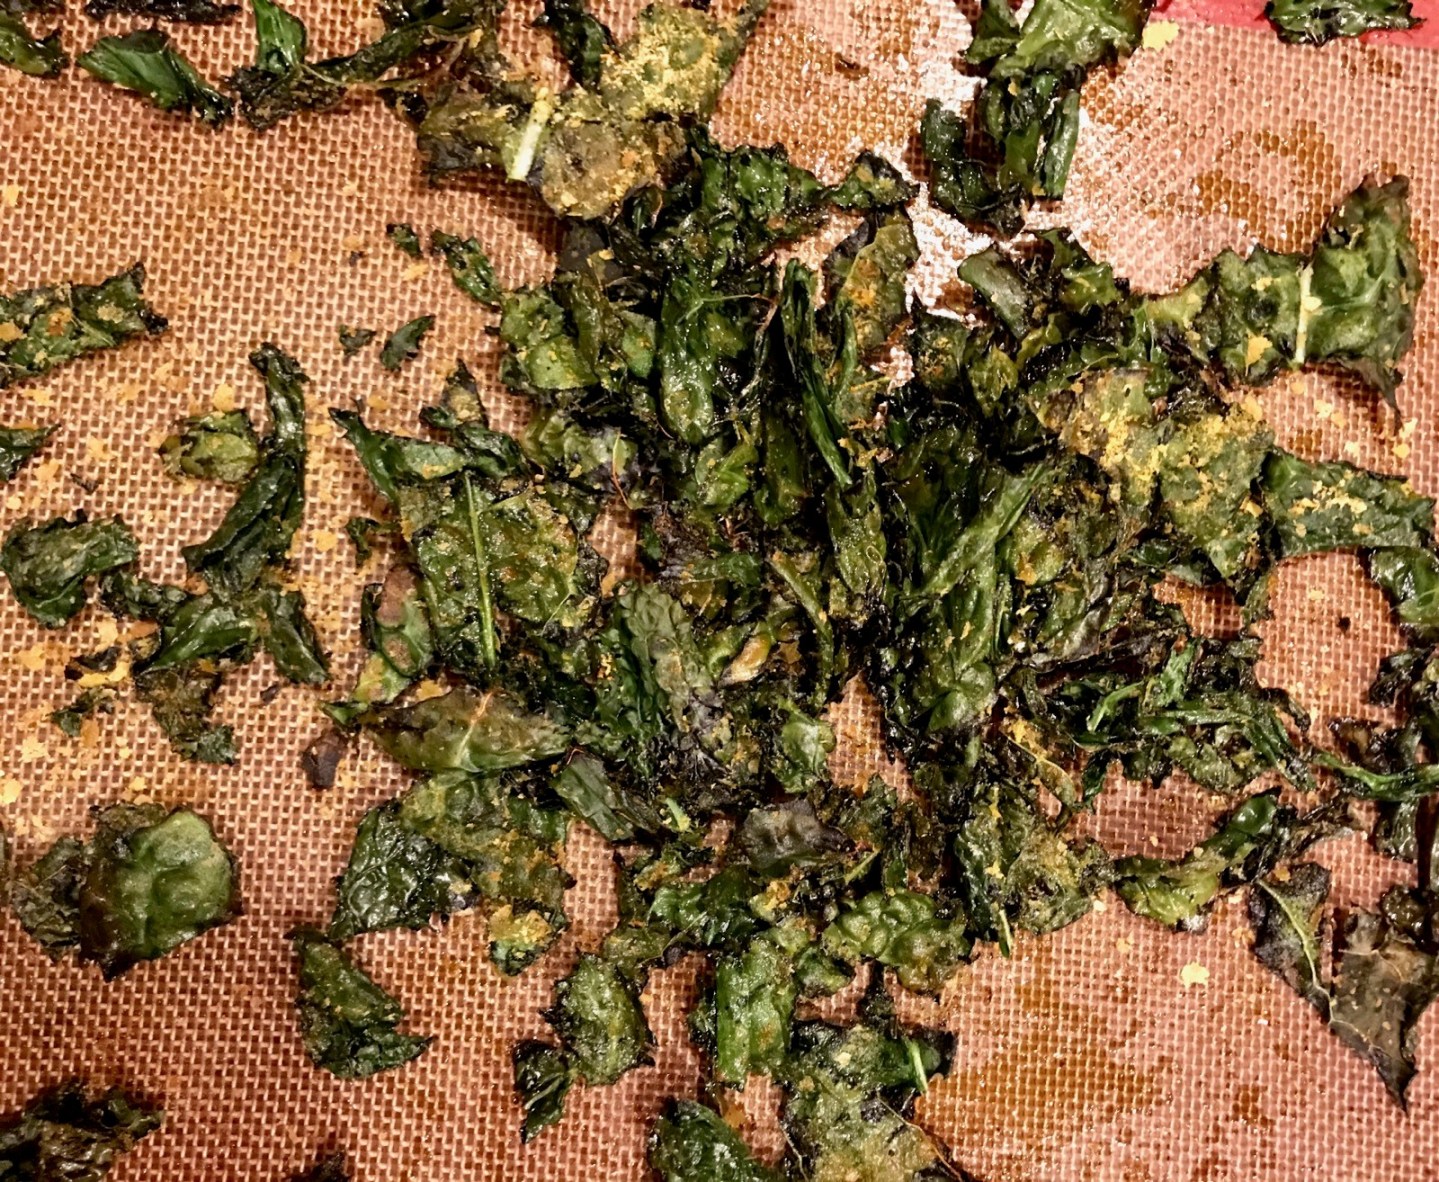 Roasted “Cheesy” Kale Chips